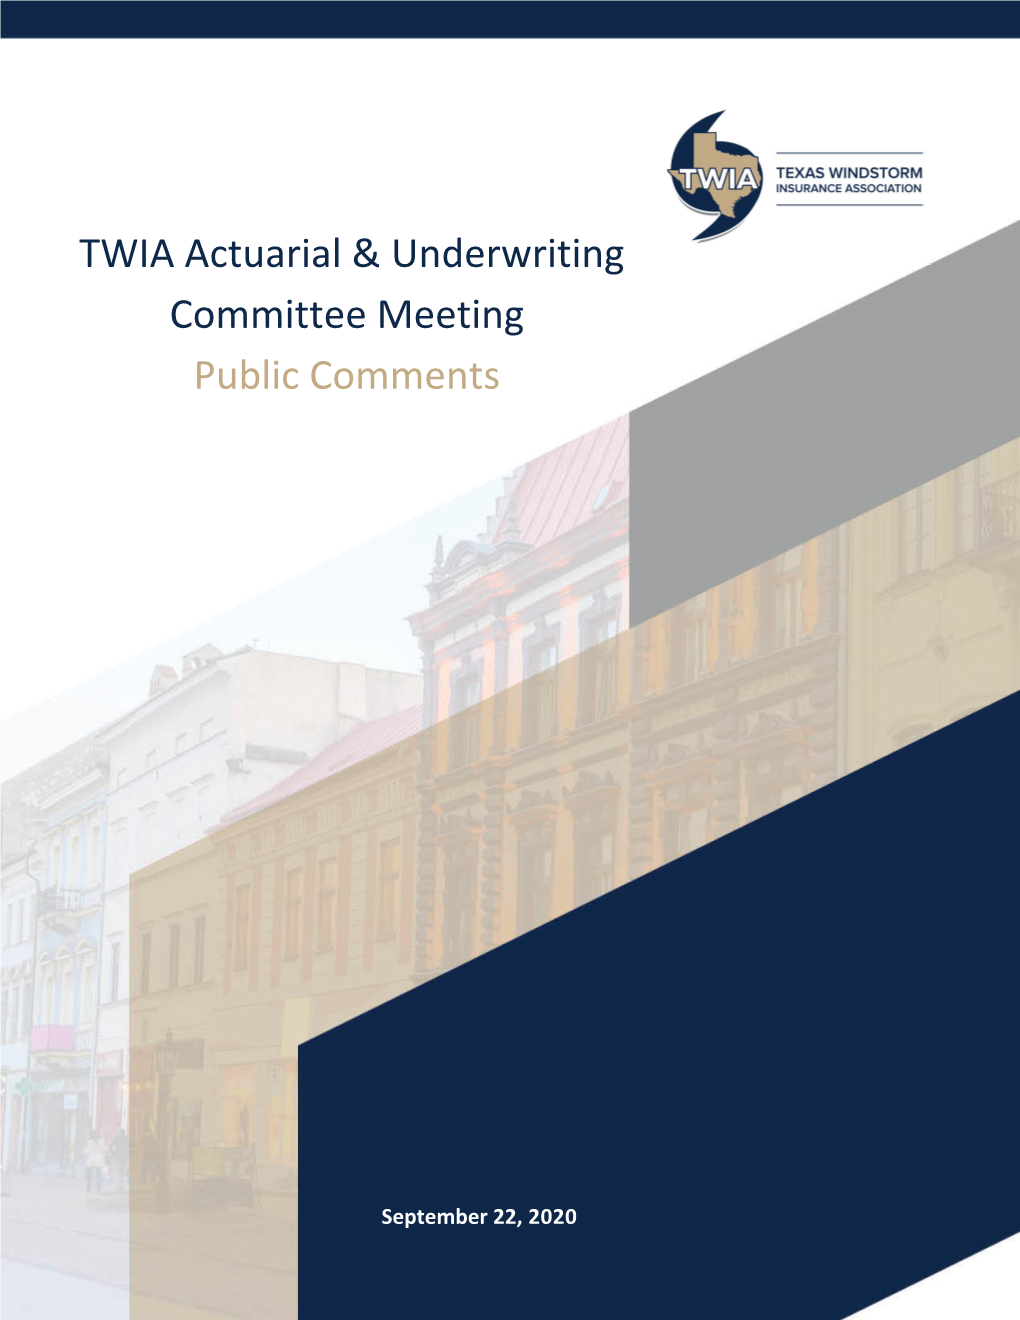 TWIA Actuarial & Underwriting Committee Meeting Public Comments